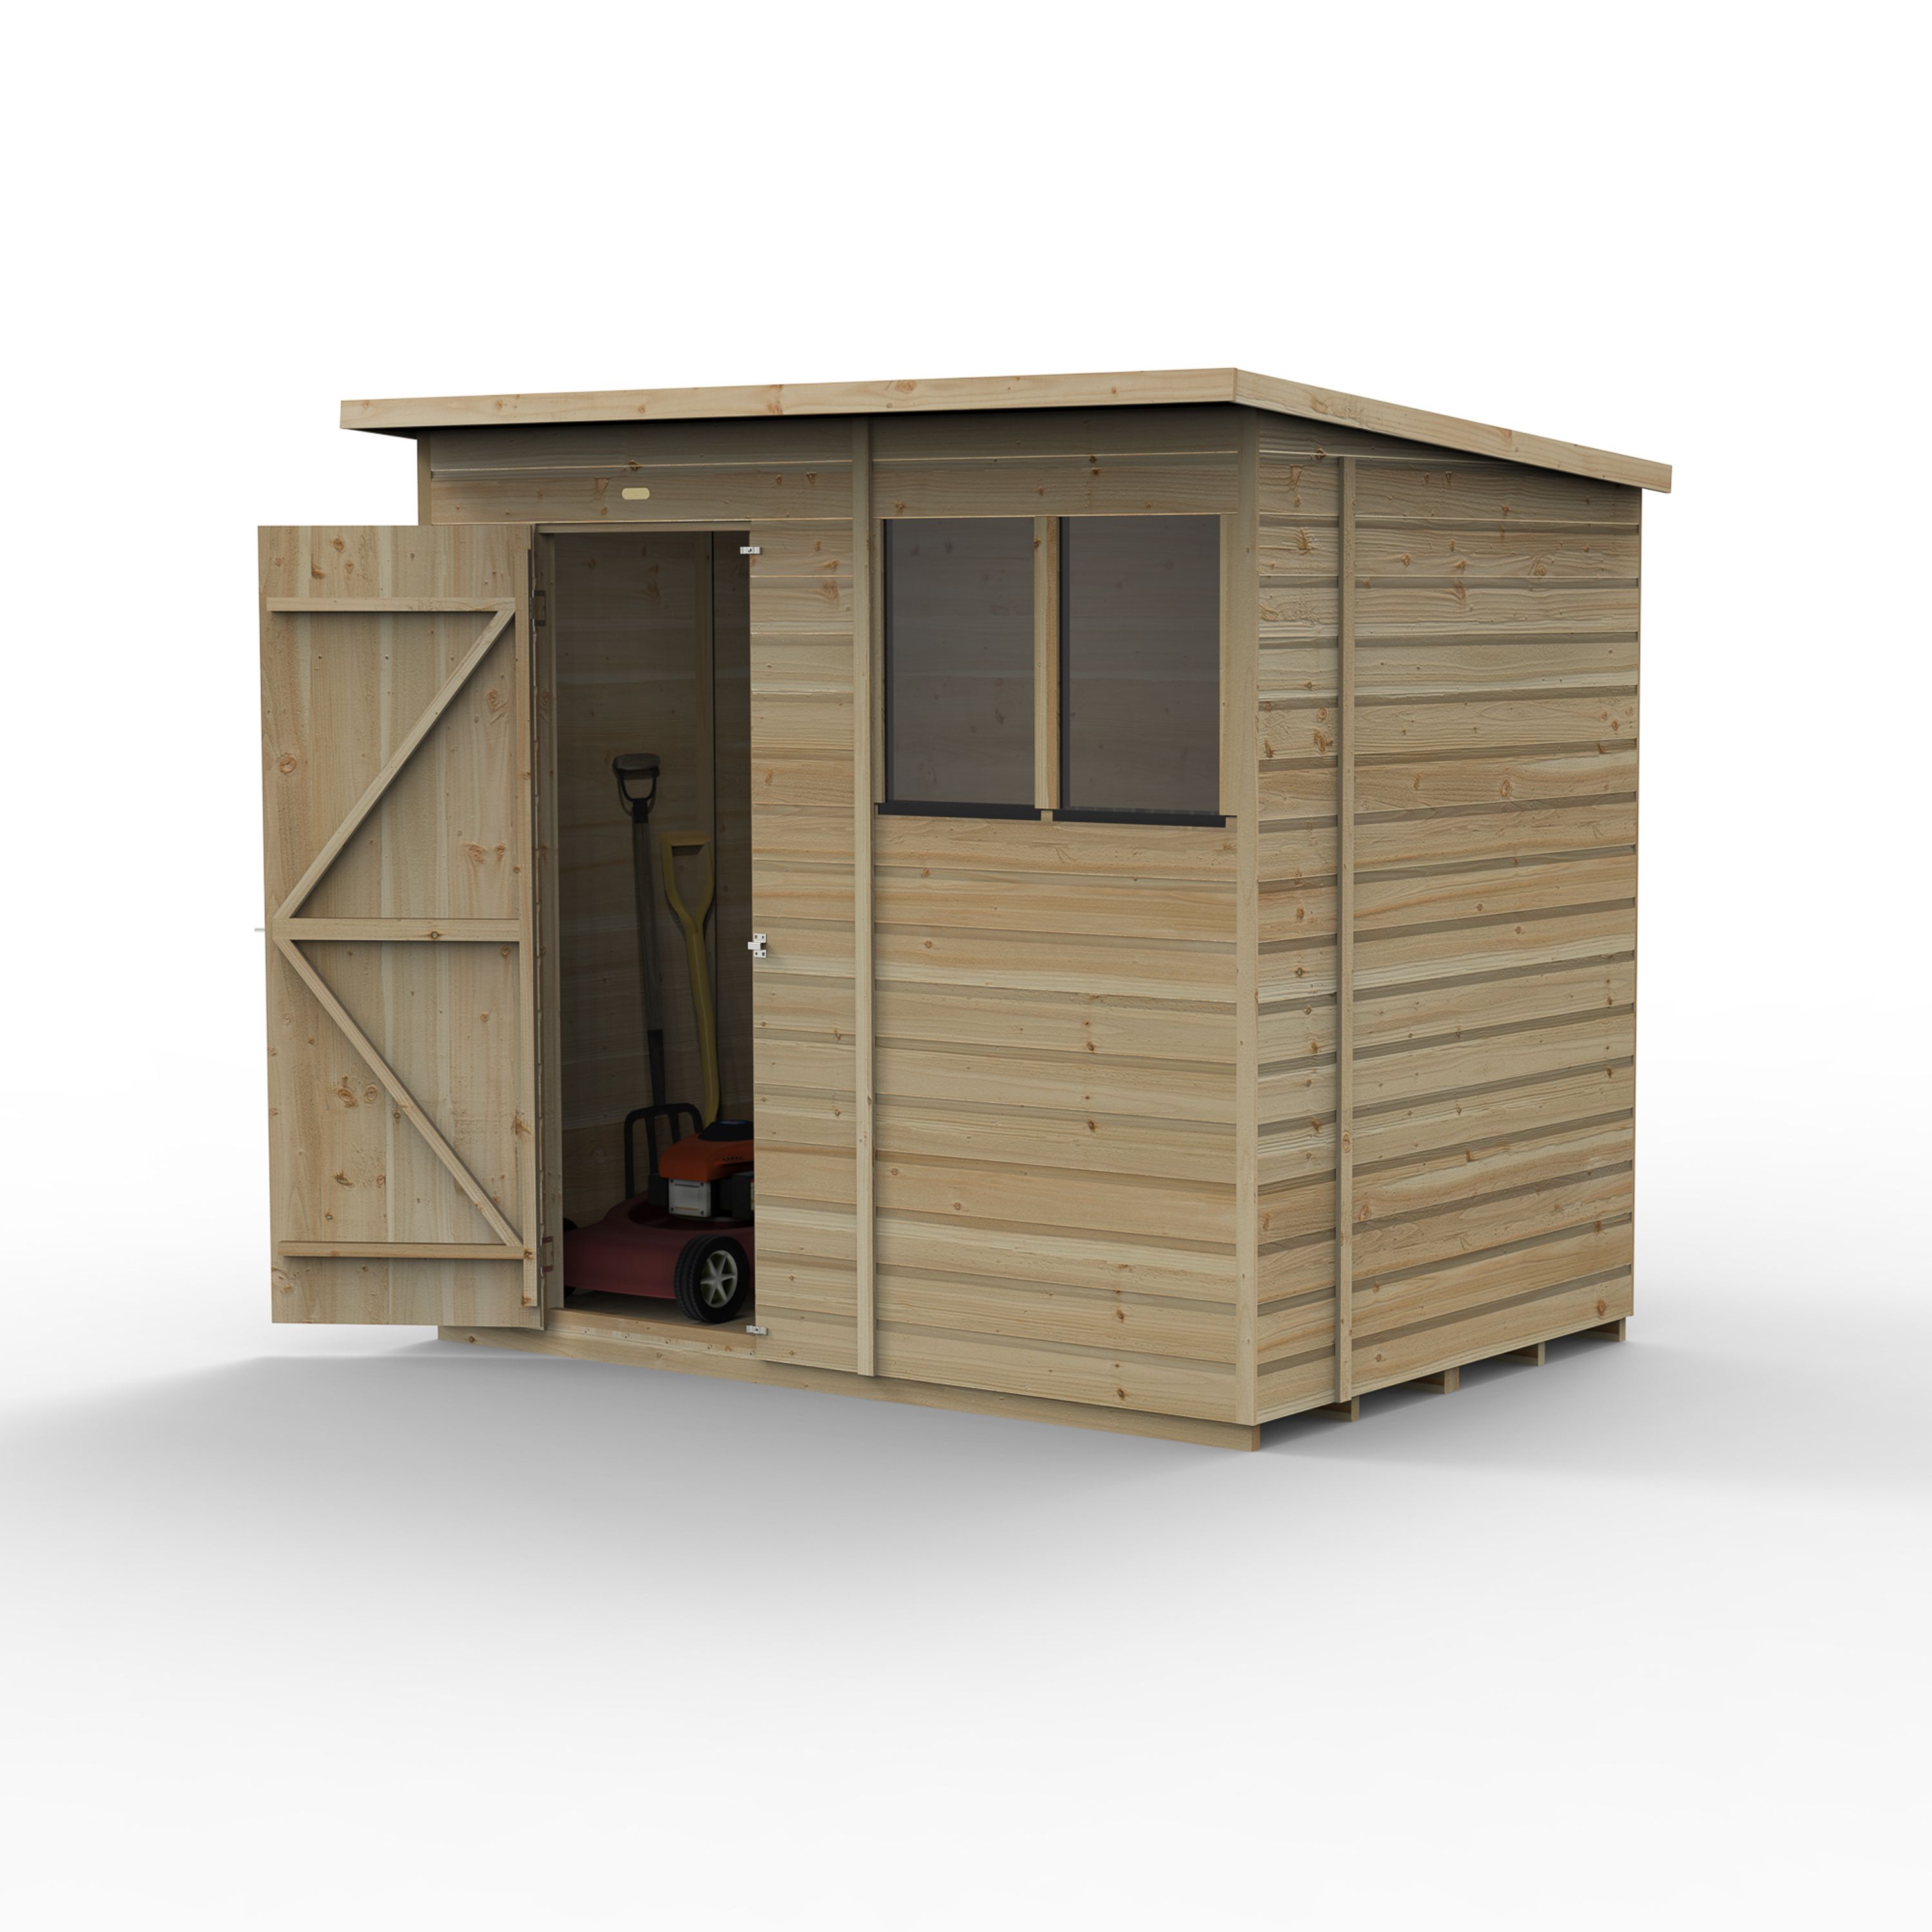 Forest Garden Beckwood 7x5 ft Pent Natural timber Wooden Shed with floor & 2 windows (Base included) - Assembly not required